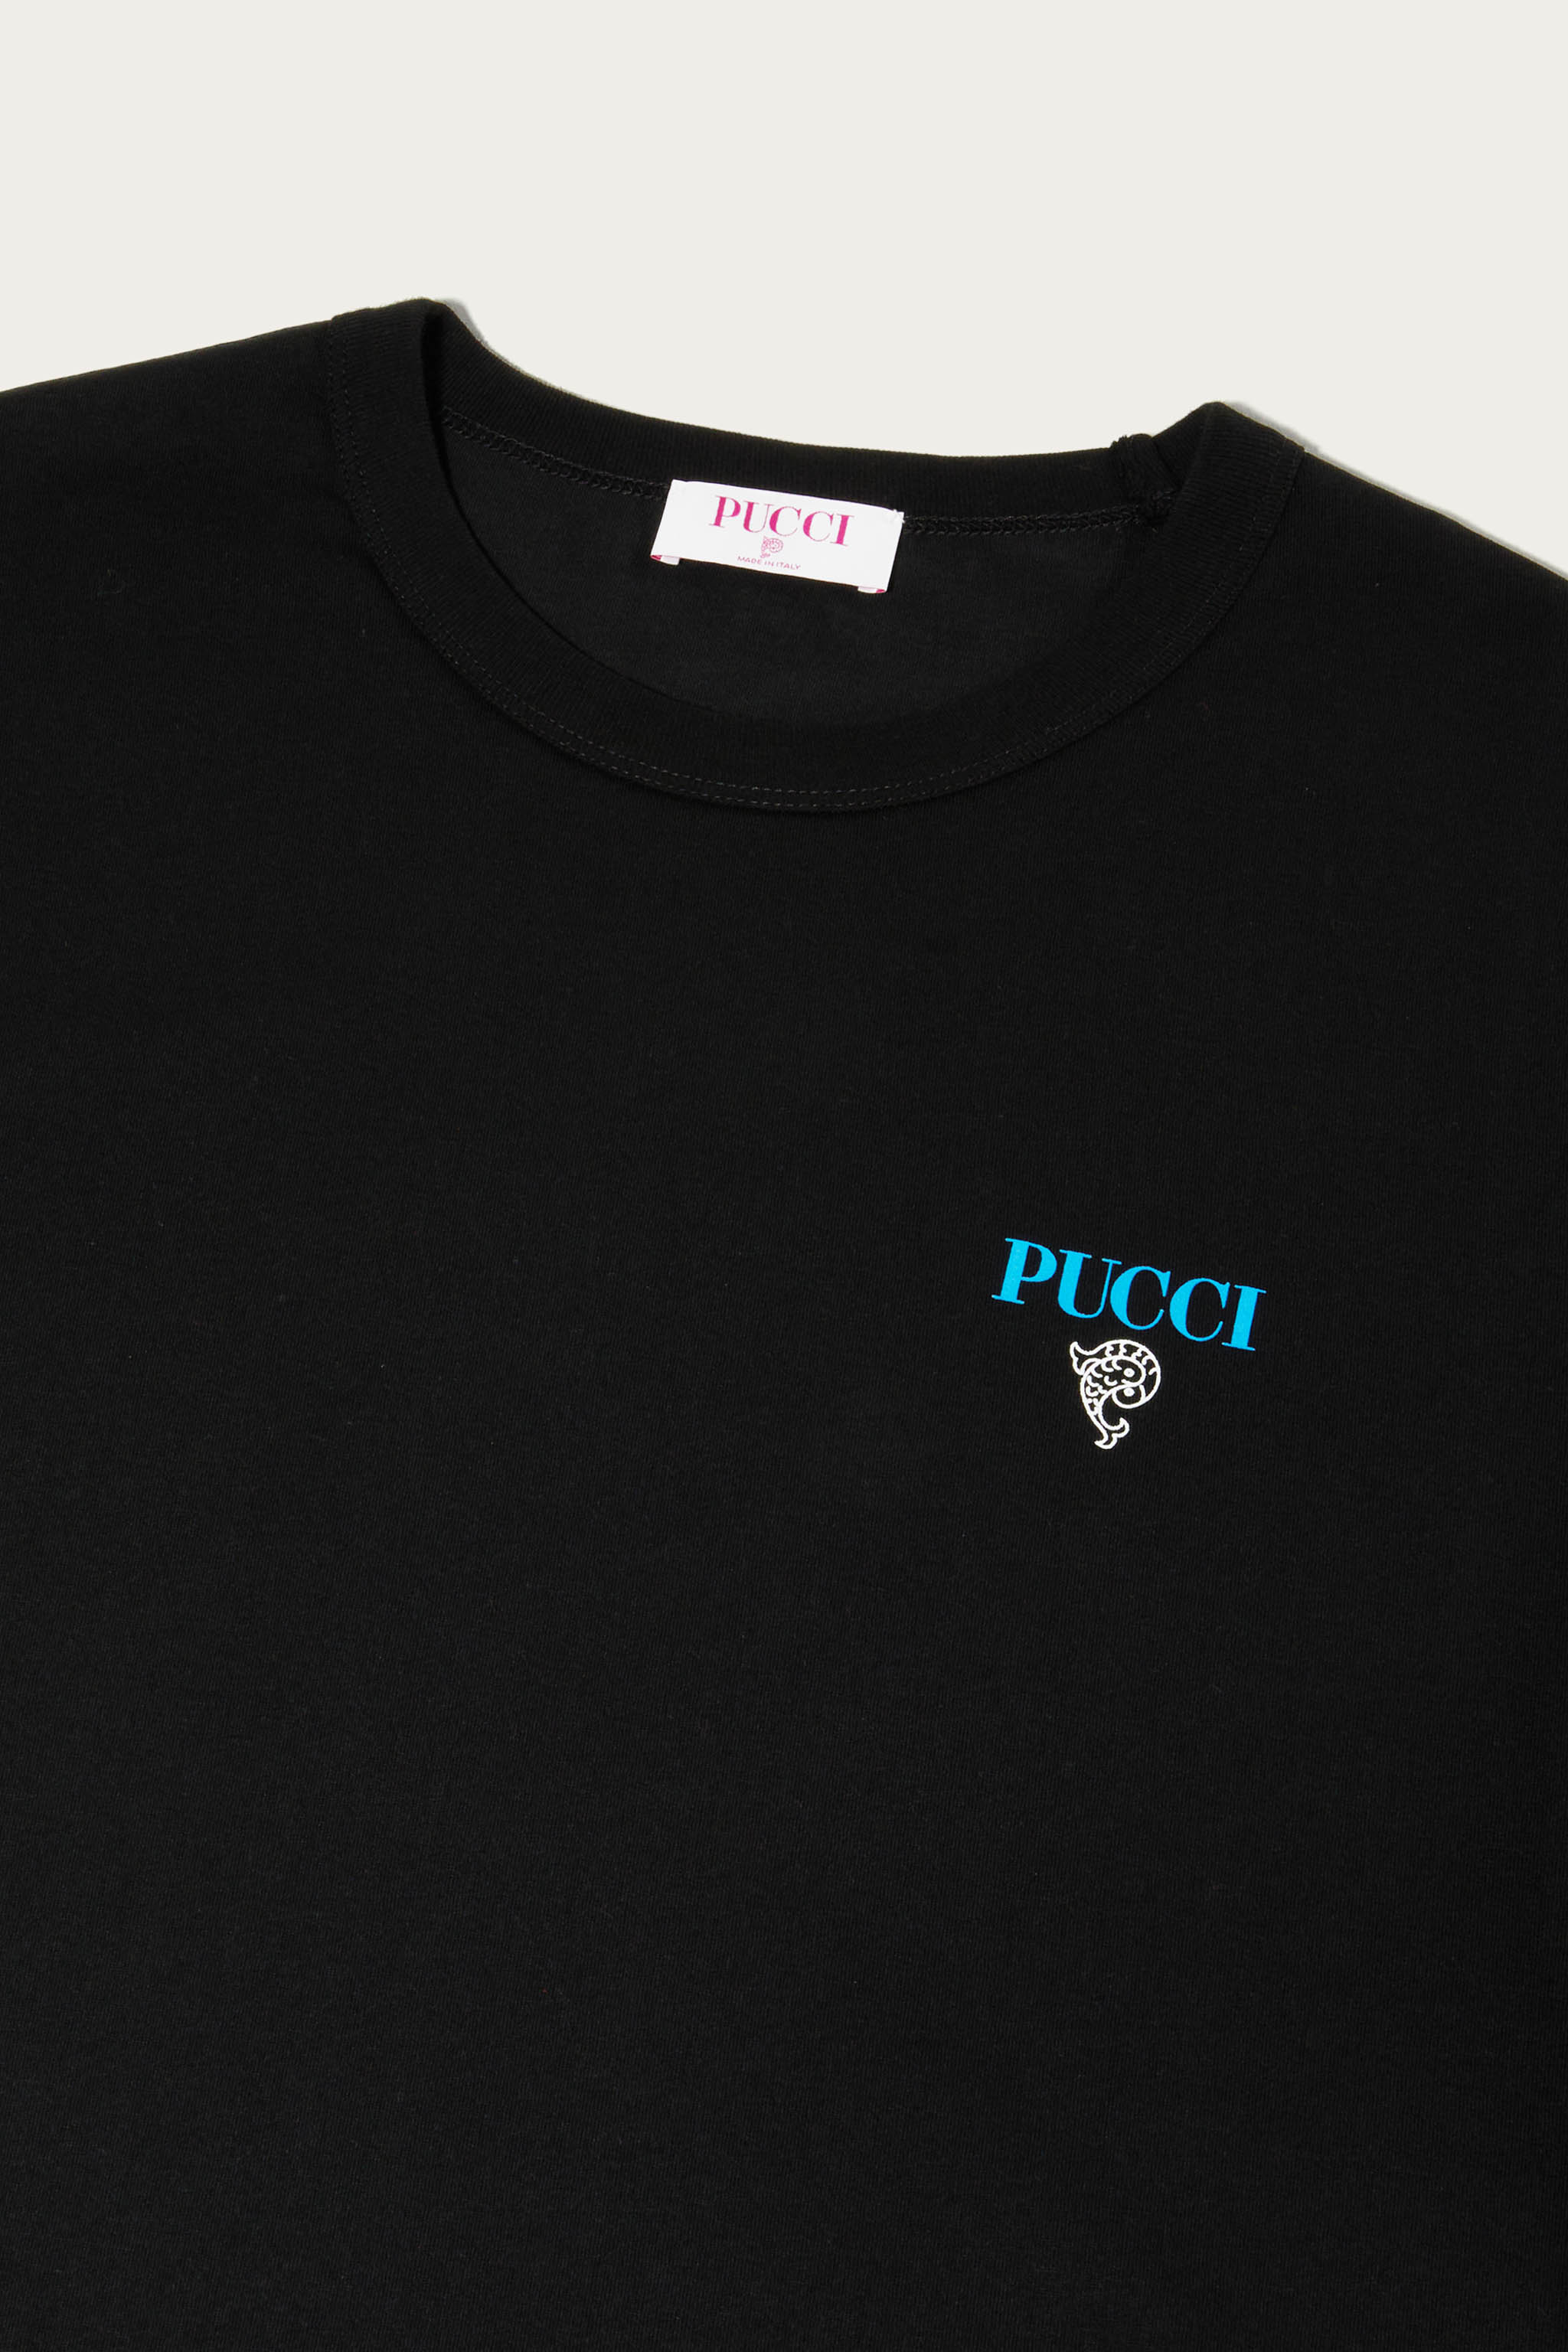 PUCCI logo-embroidered ribbed knit jumper - Blue